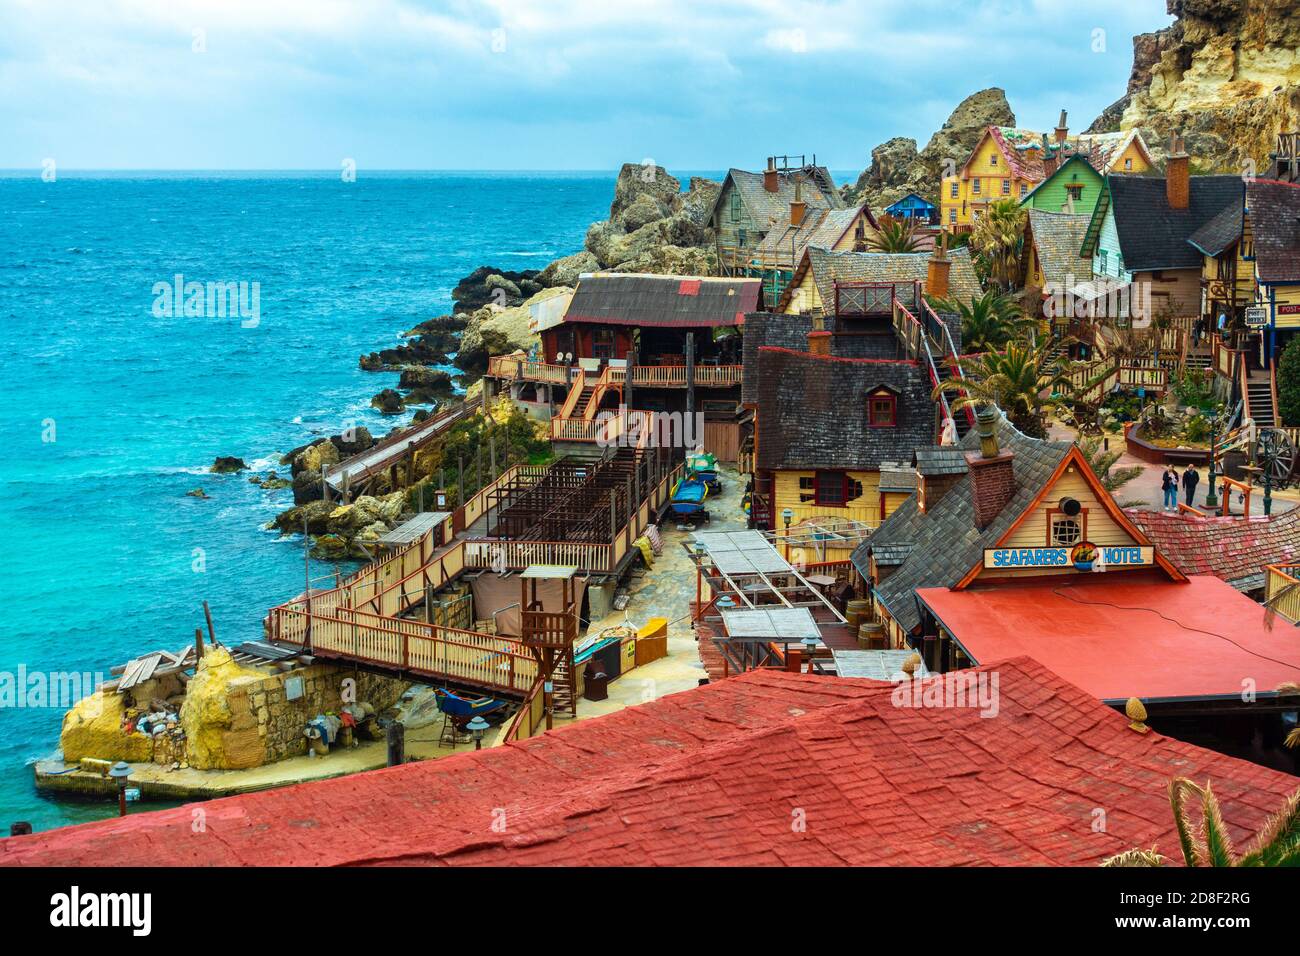 Popeye Village houses from above, Malta Stock Photo